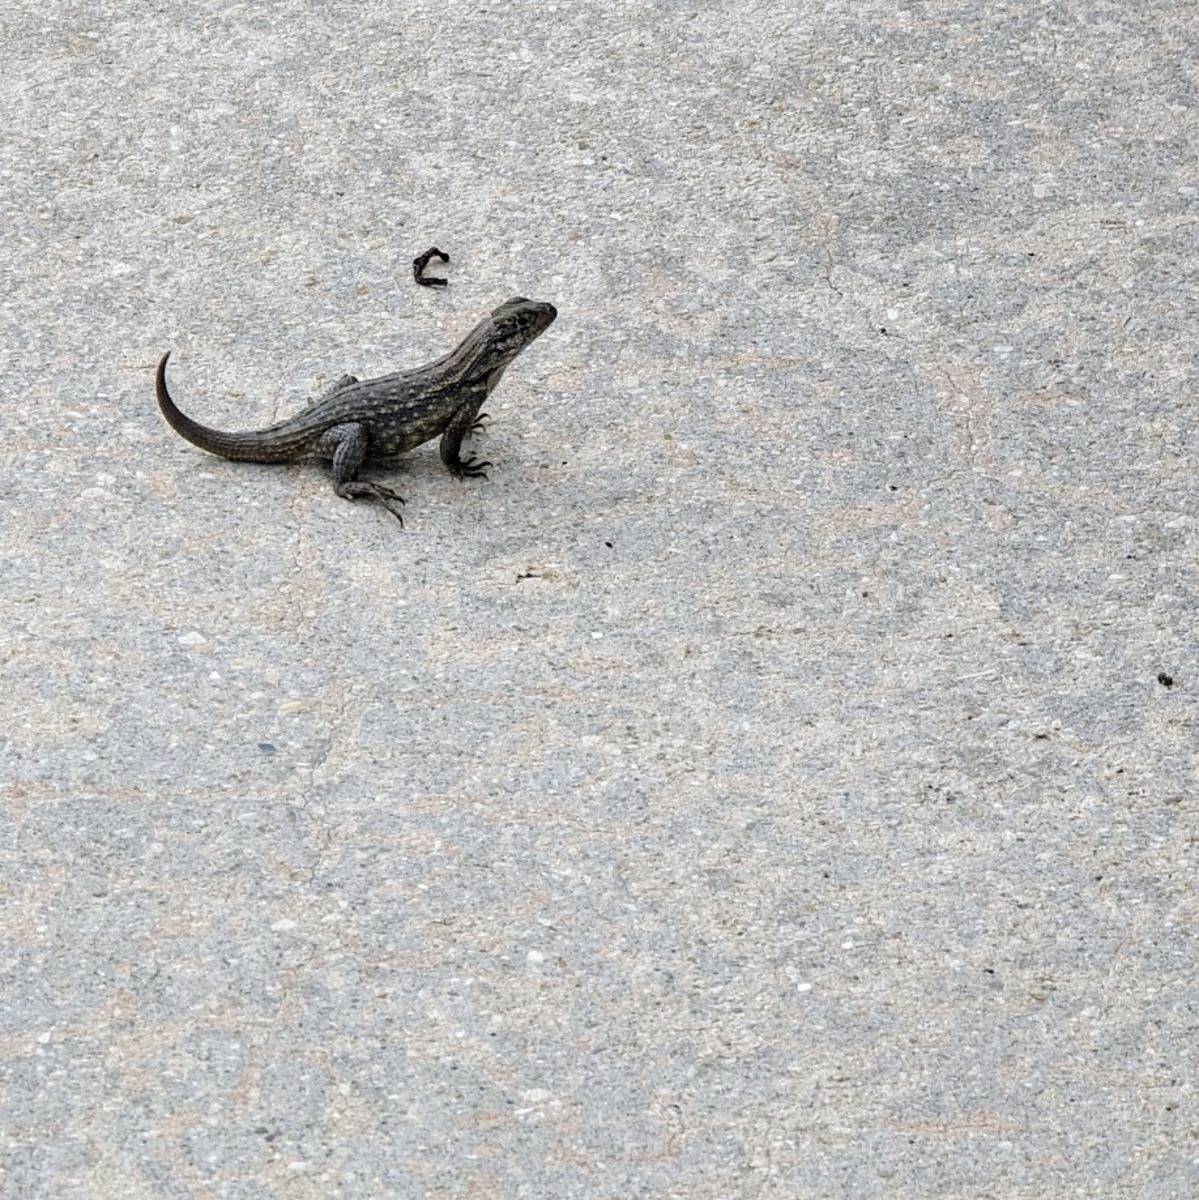 Some gecko or lizard sitting on the concreate, about to run away from me.